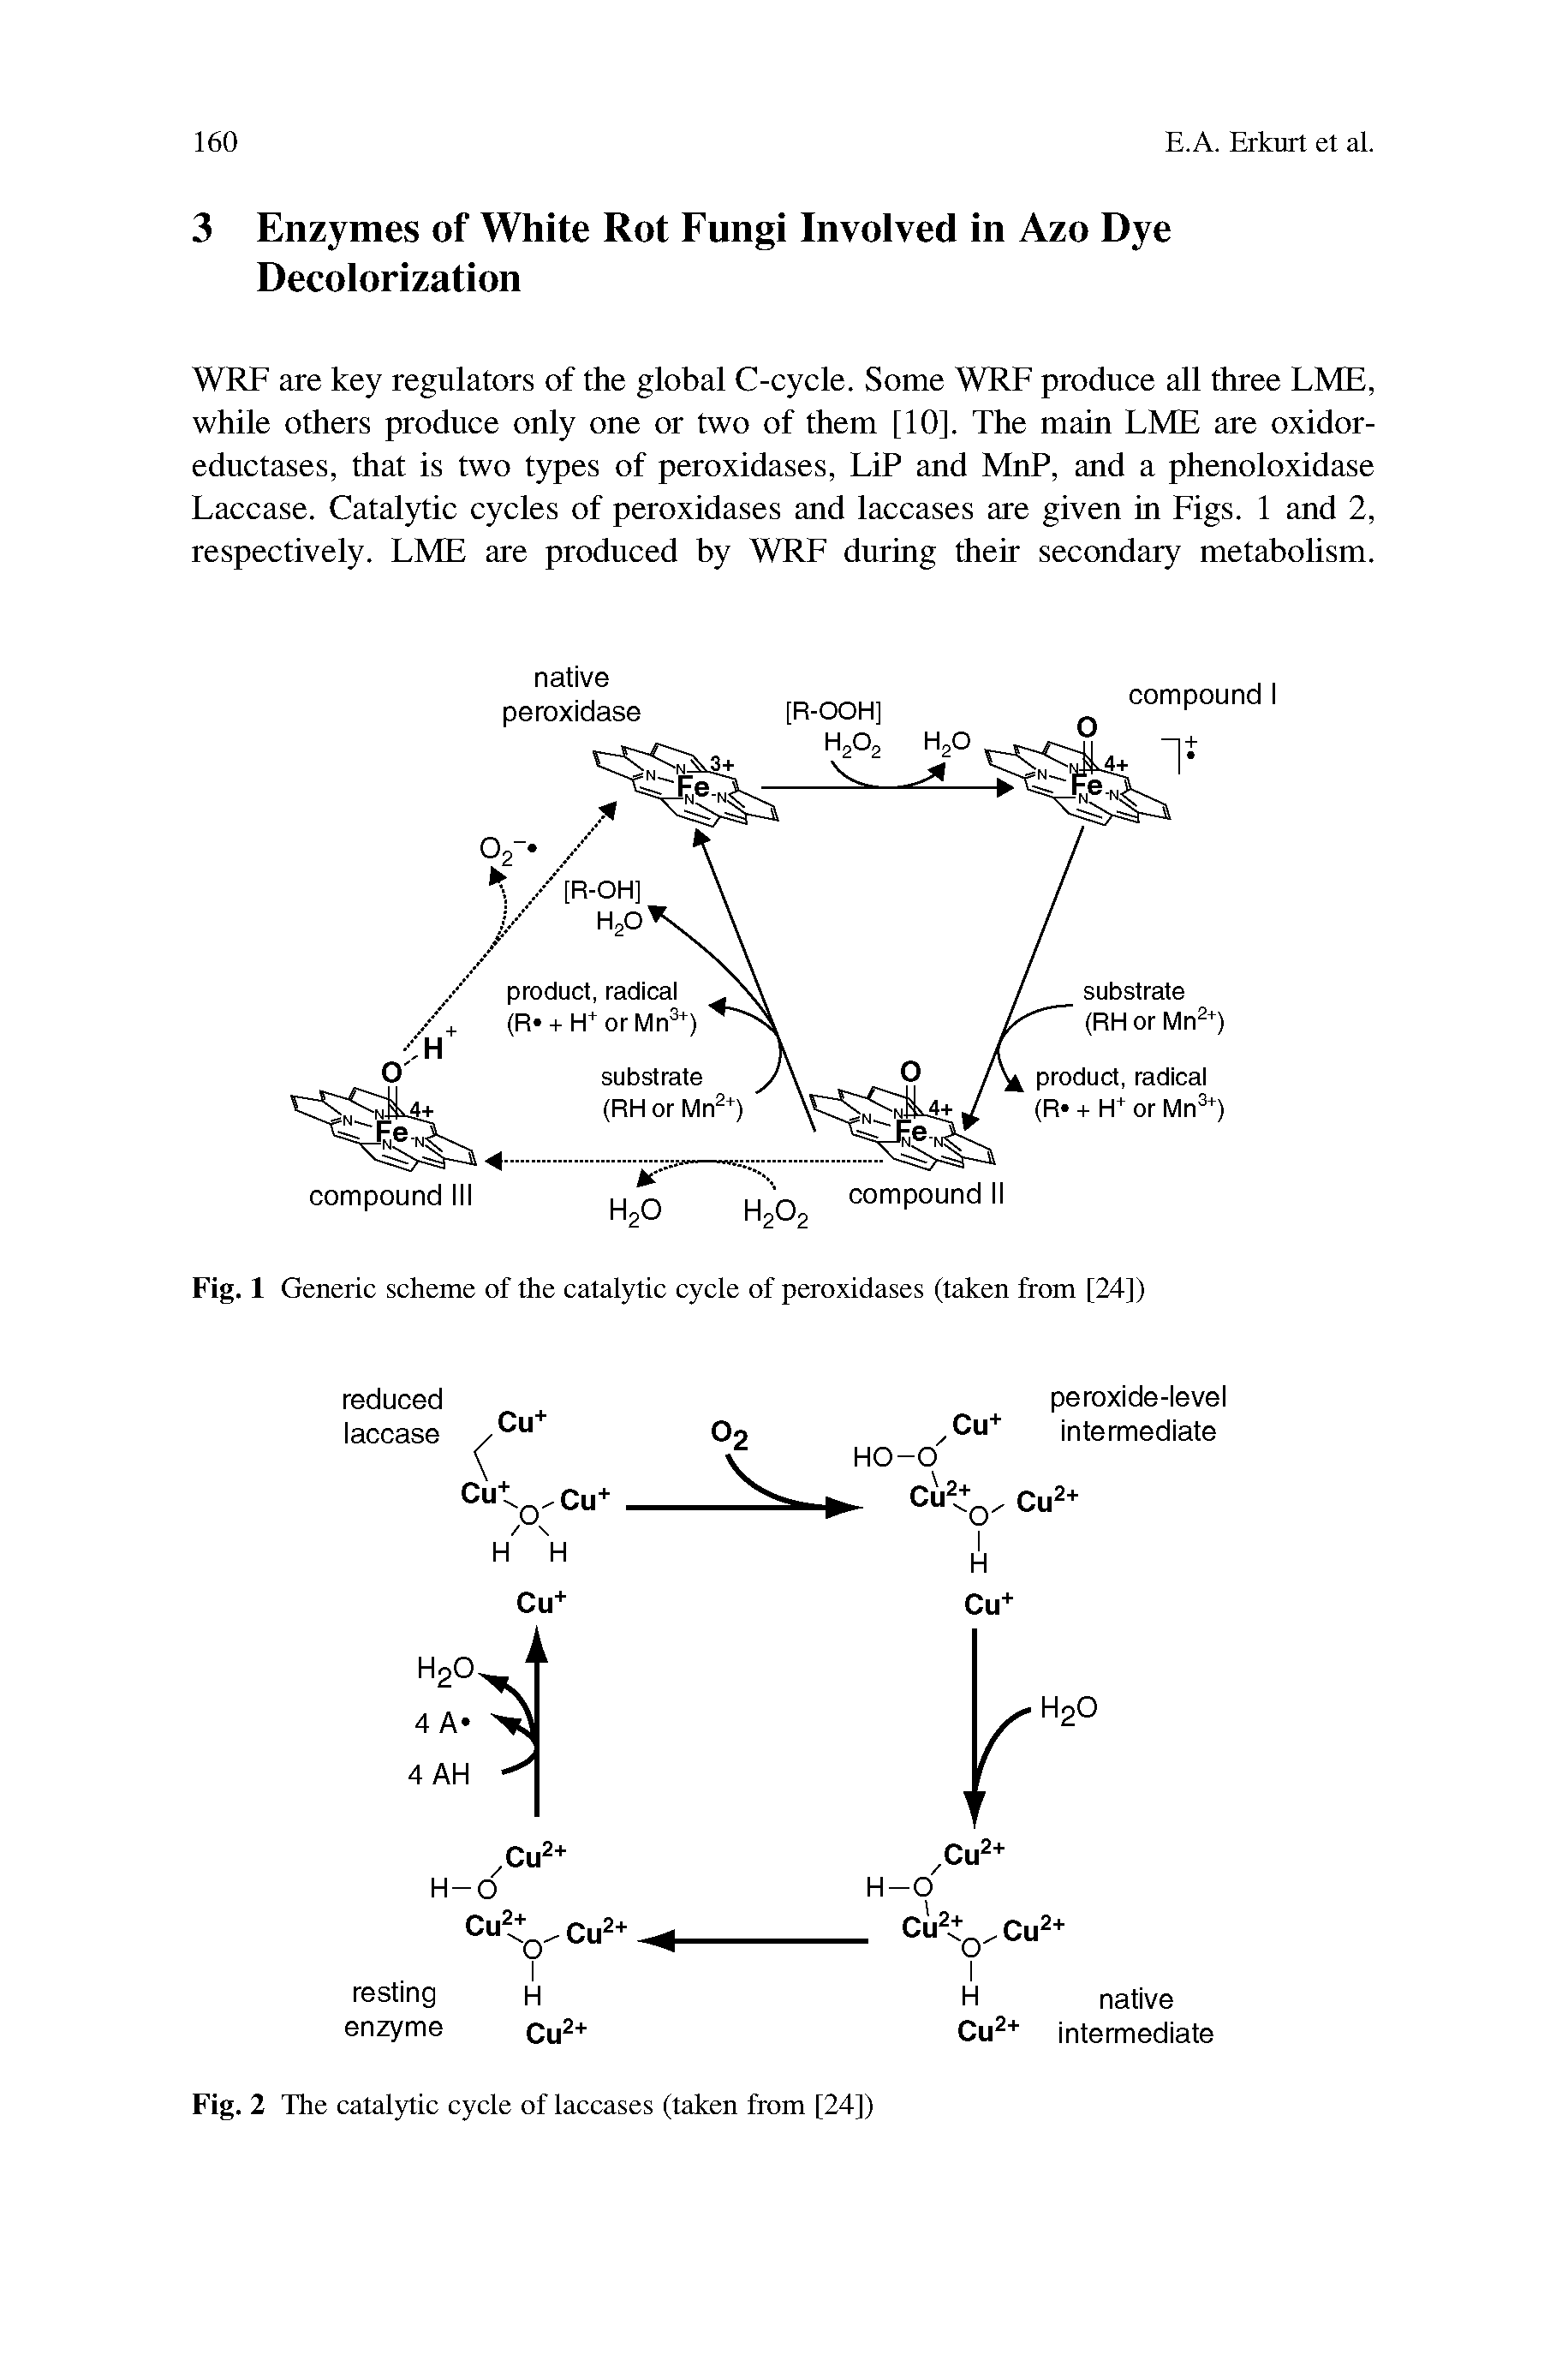 Fig. 1 Generic scheme of the catalytic cycle of peroxidases (taken from [24])...